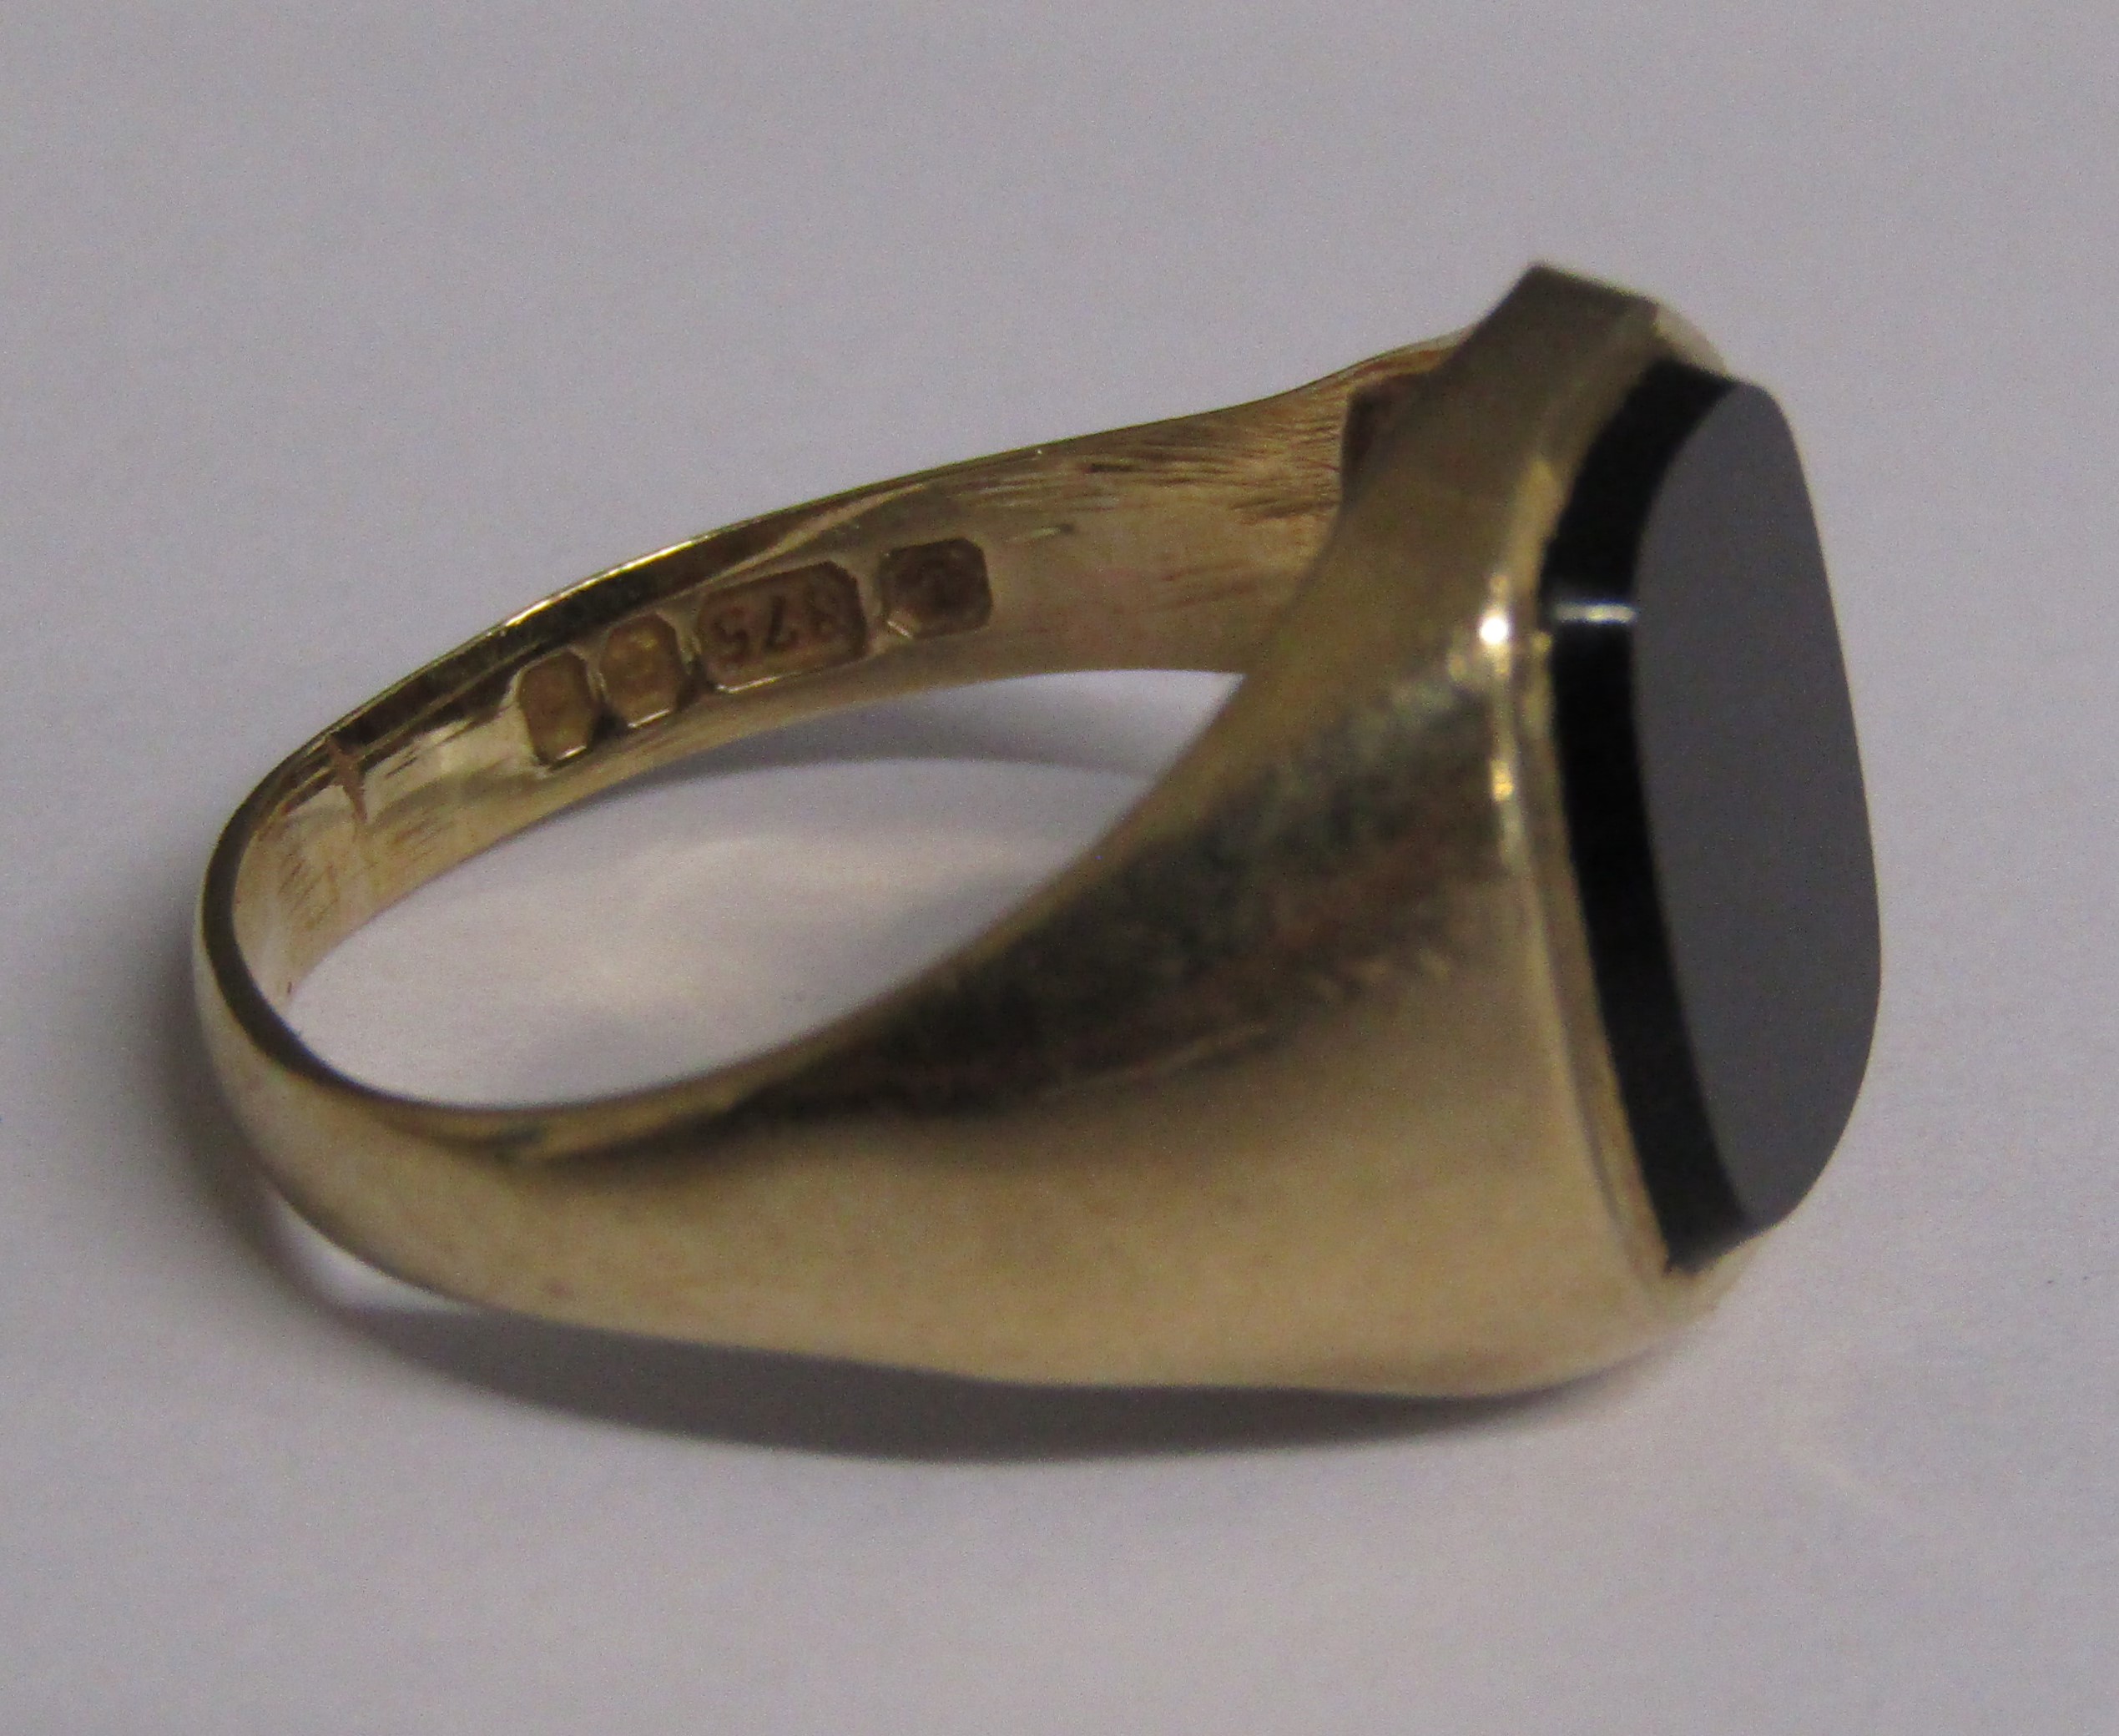 9ct gold signet ring size K and cufflinks with marks to chain and both ends - total weight 8.85g - Image 5 of 9